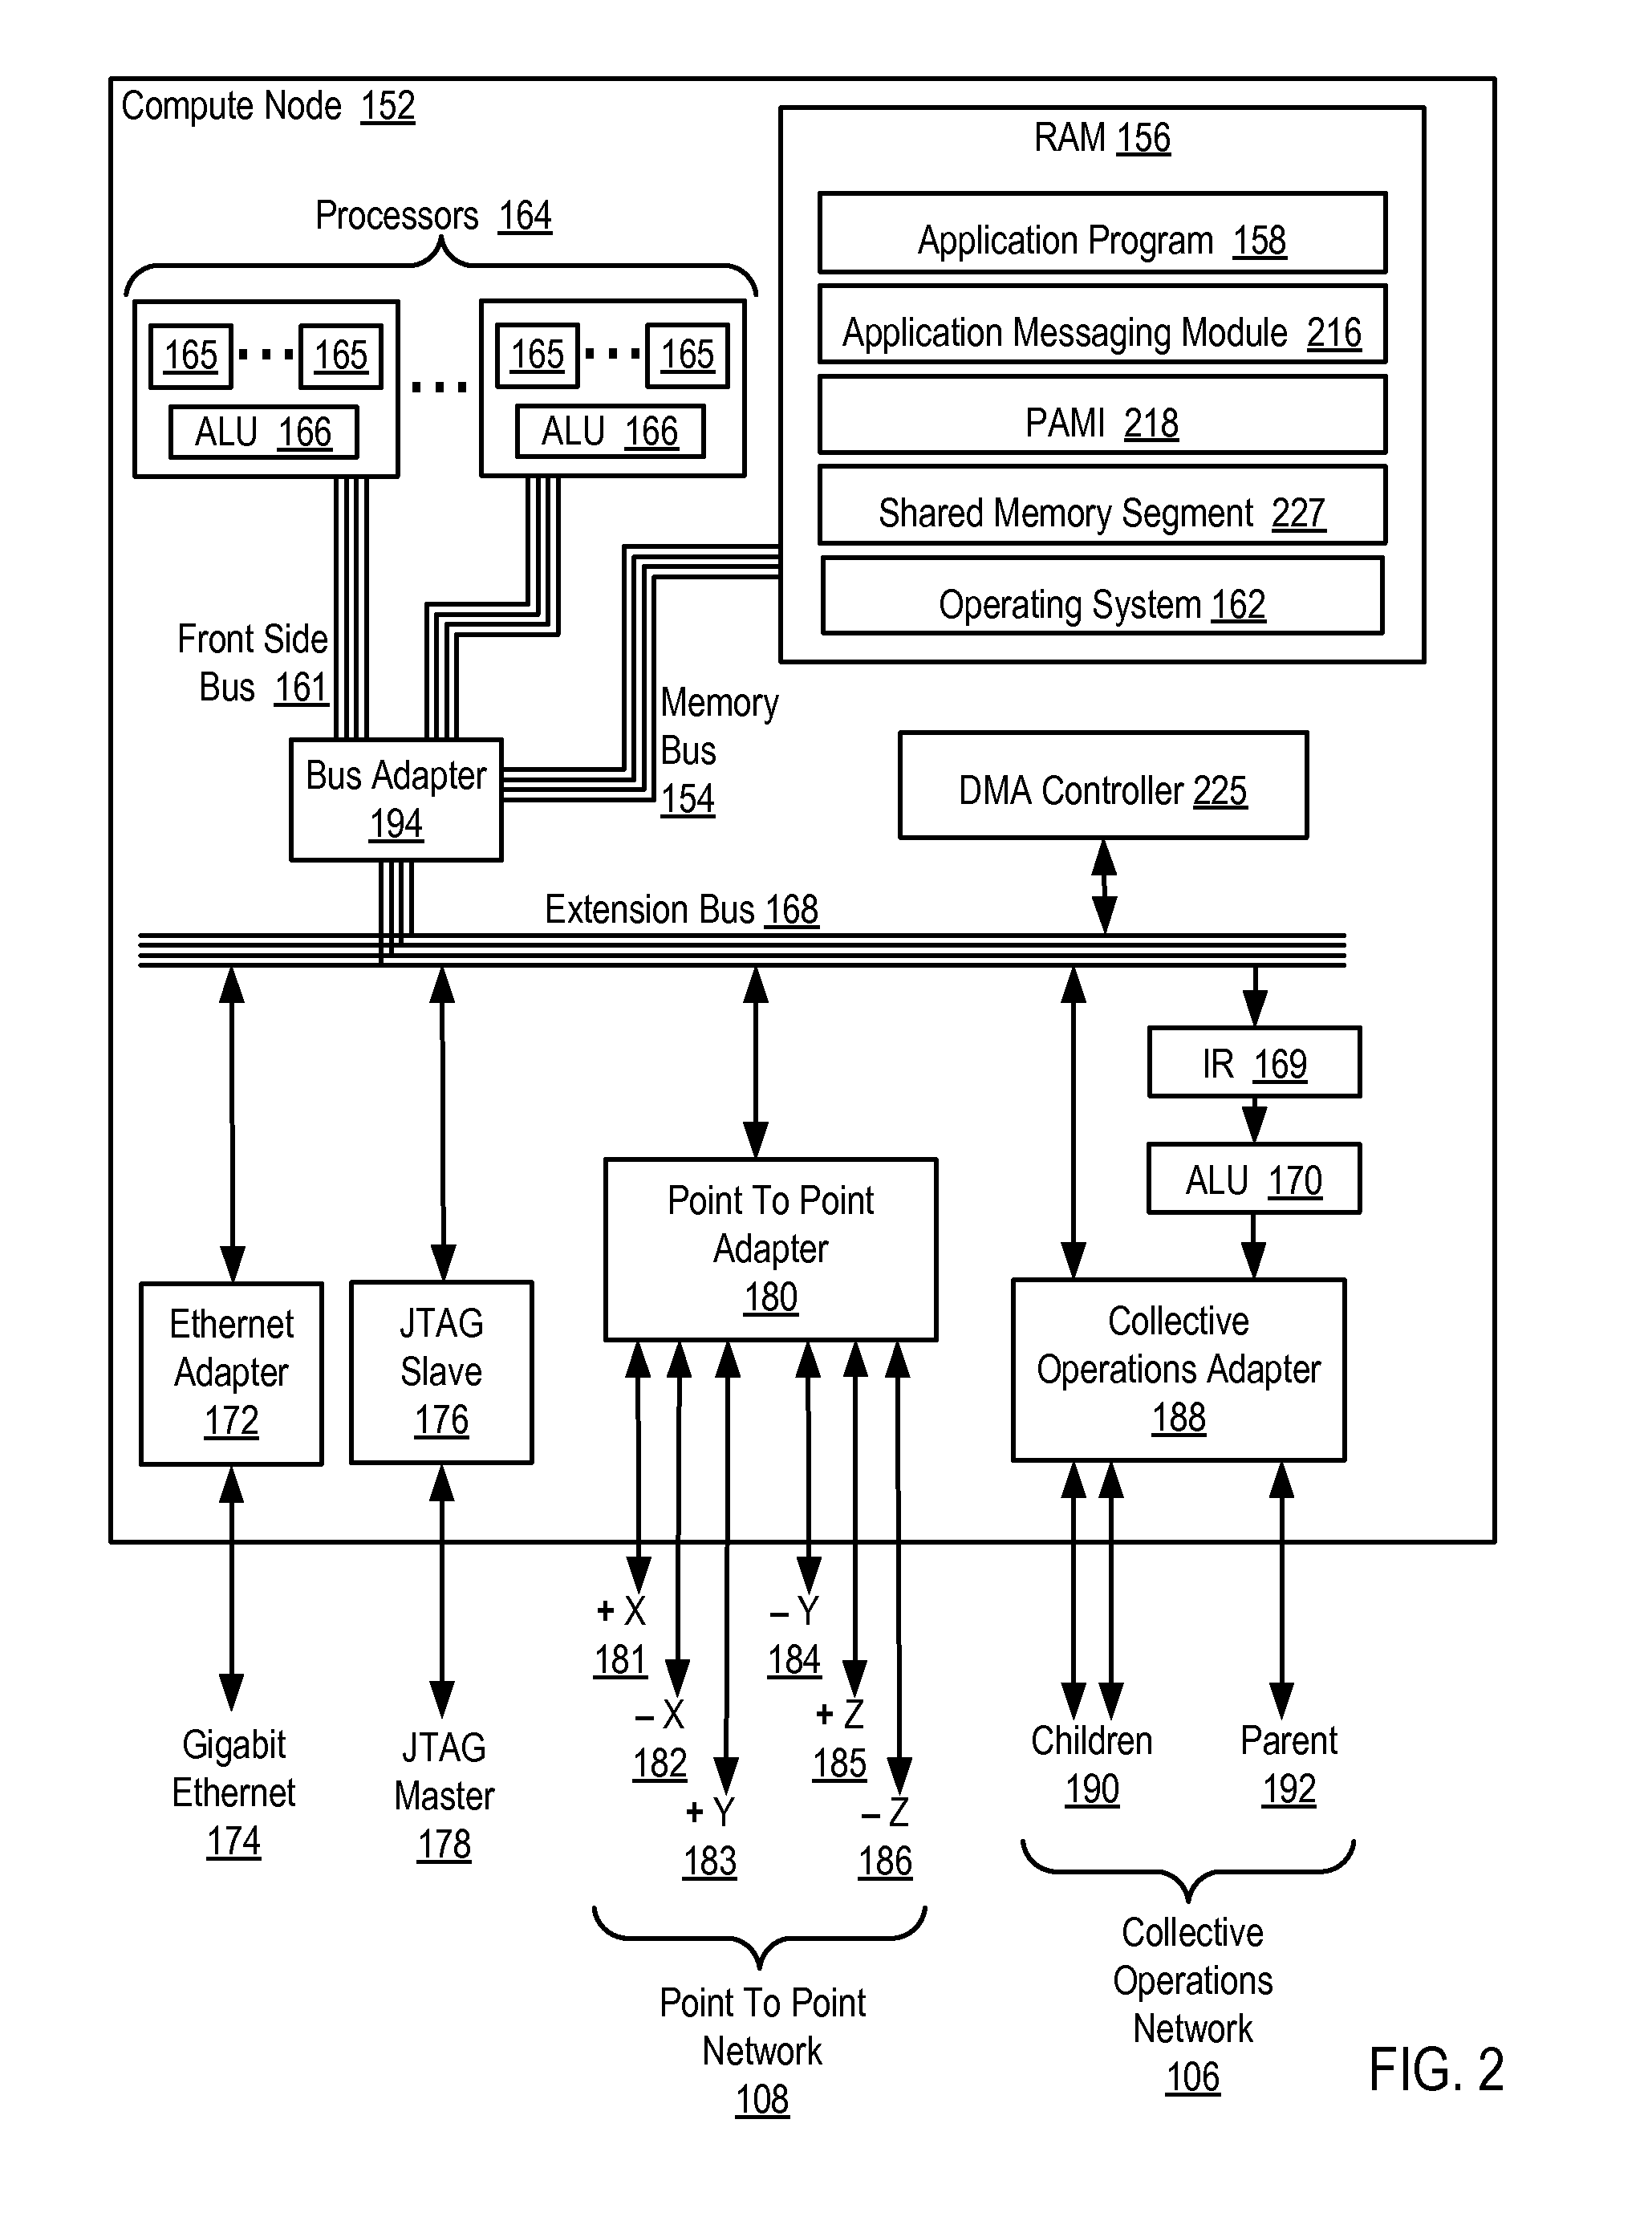 Fencing Direct Memory Access Data Transfers In A Parallel Active Messaging Interface Of A Parallel Computer